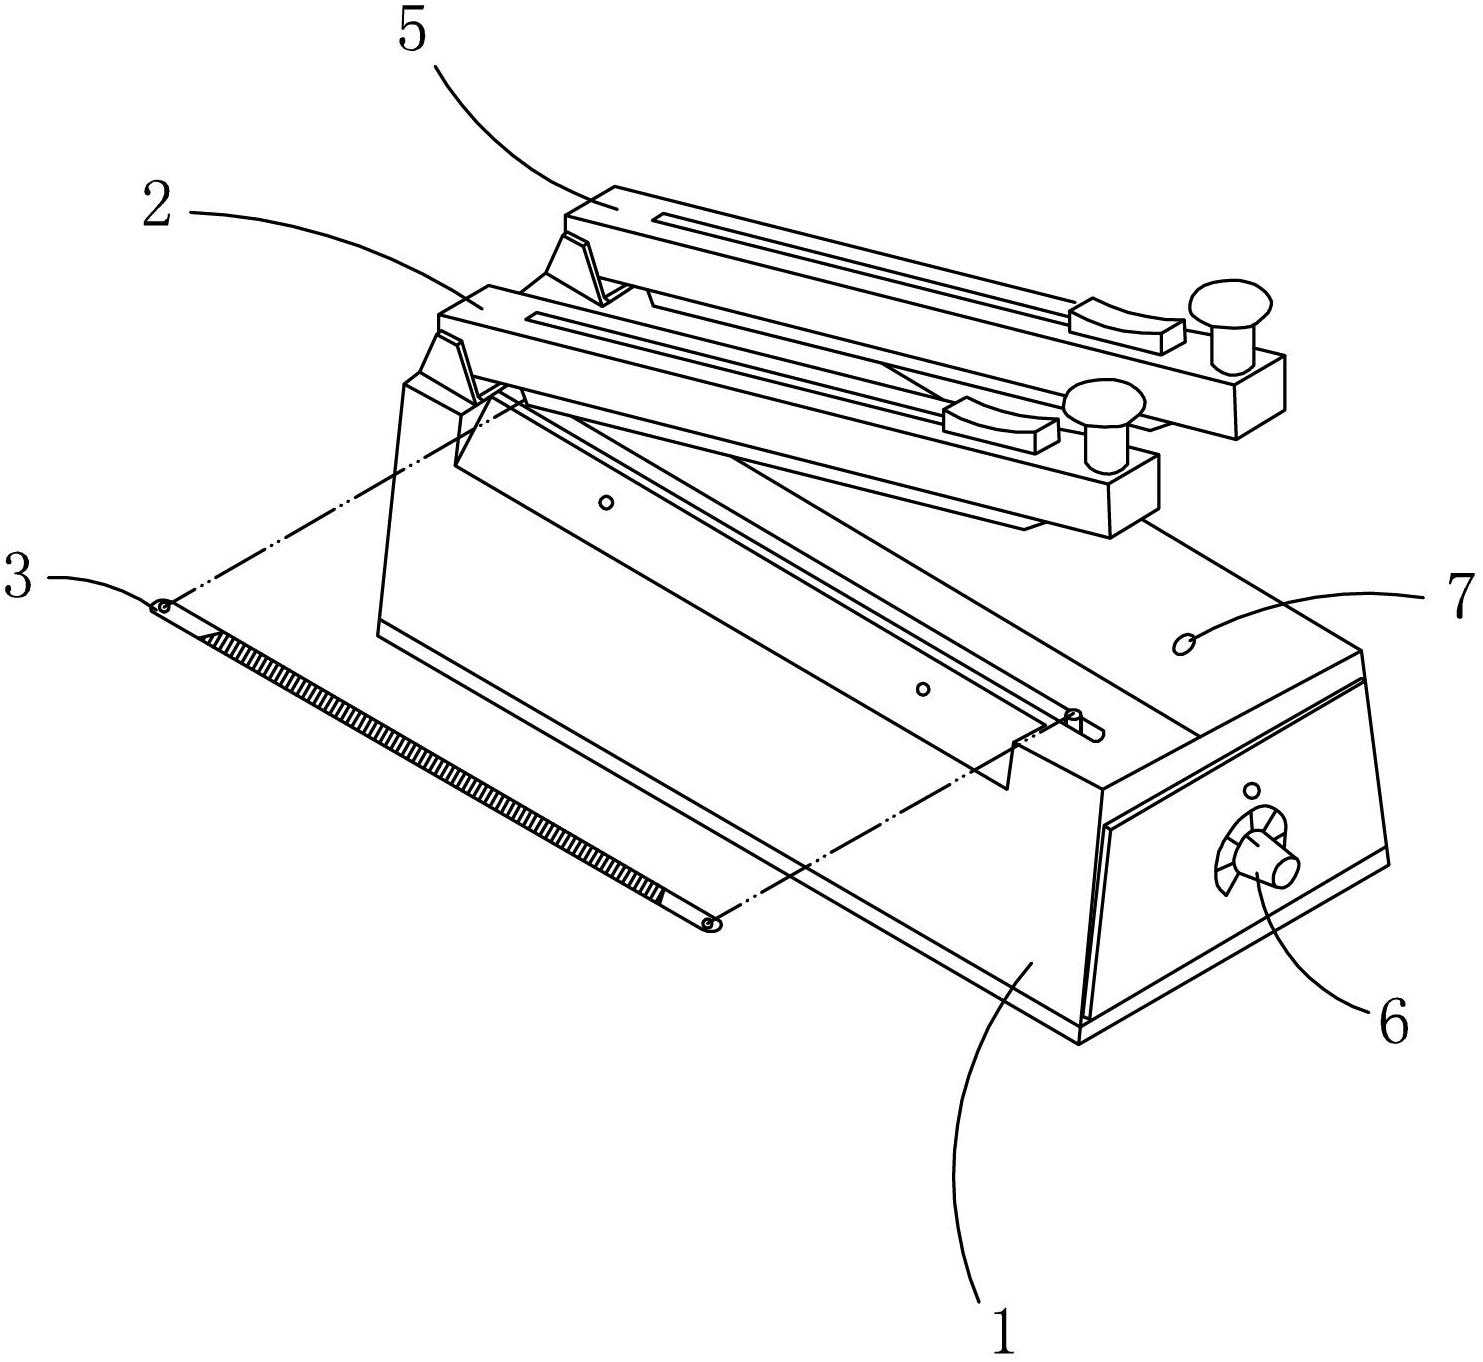 Heat sealer with vacuum pumping device